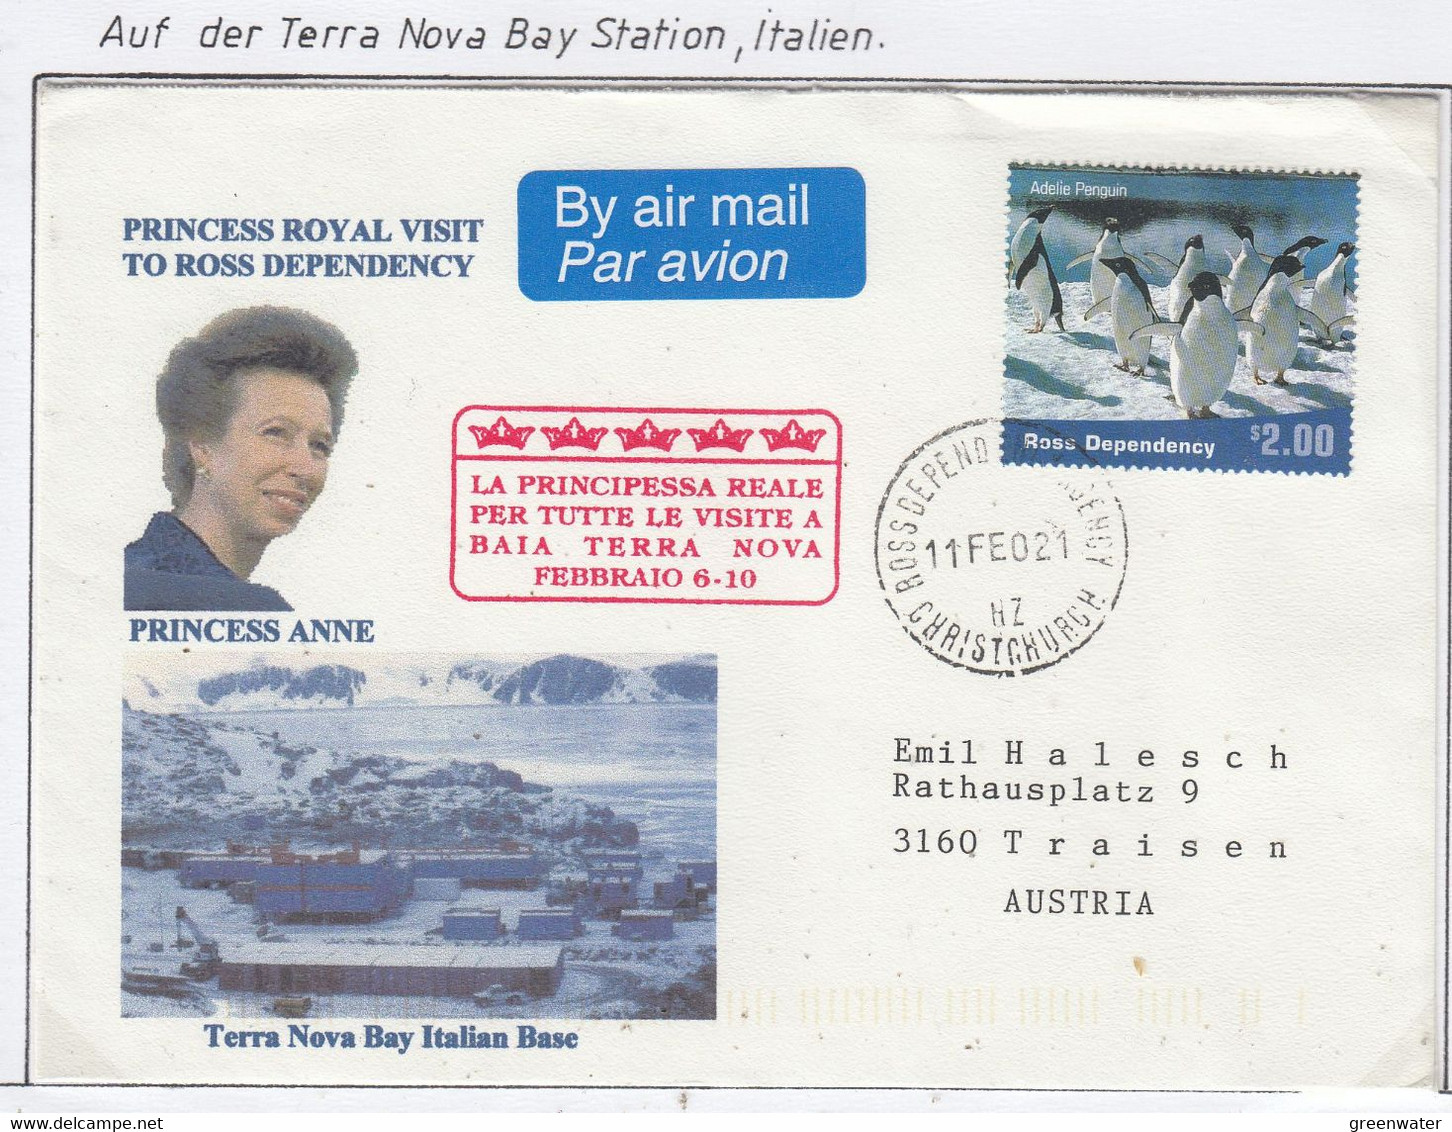 Ross Dependency Terra Nova Bay Station Italy 2002 Cover Visit Princess Anne (SC112A) - Covers & Documents